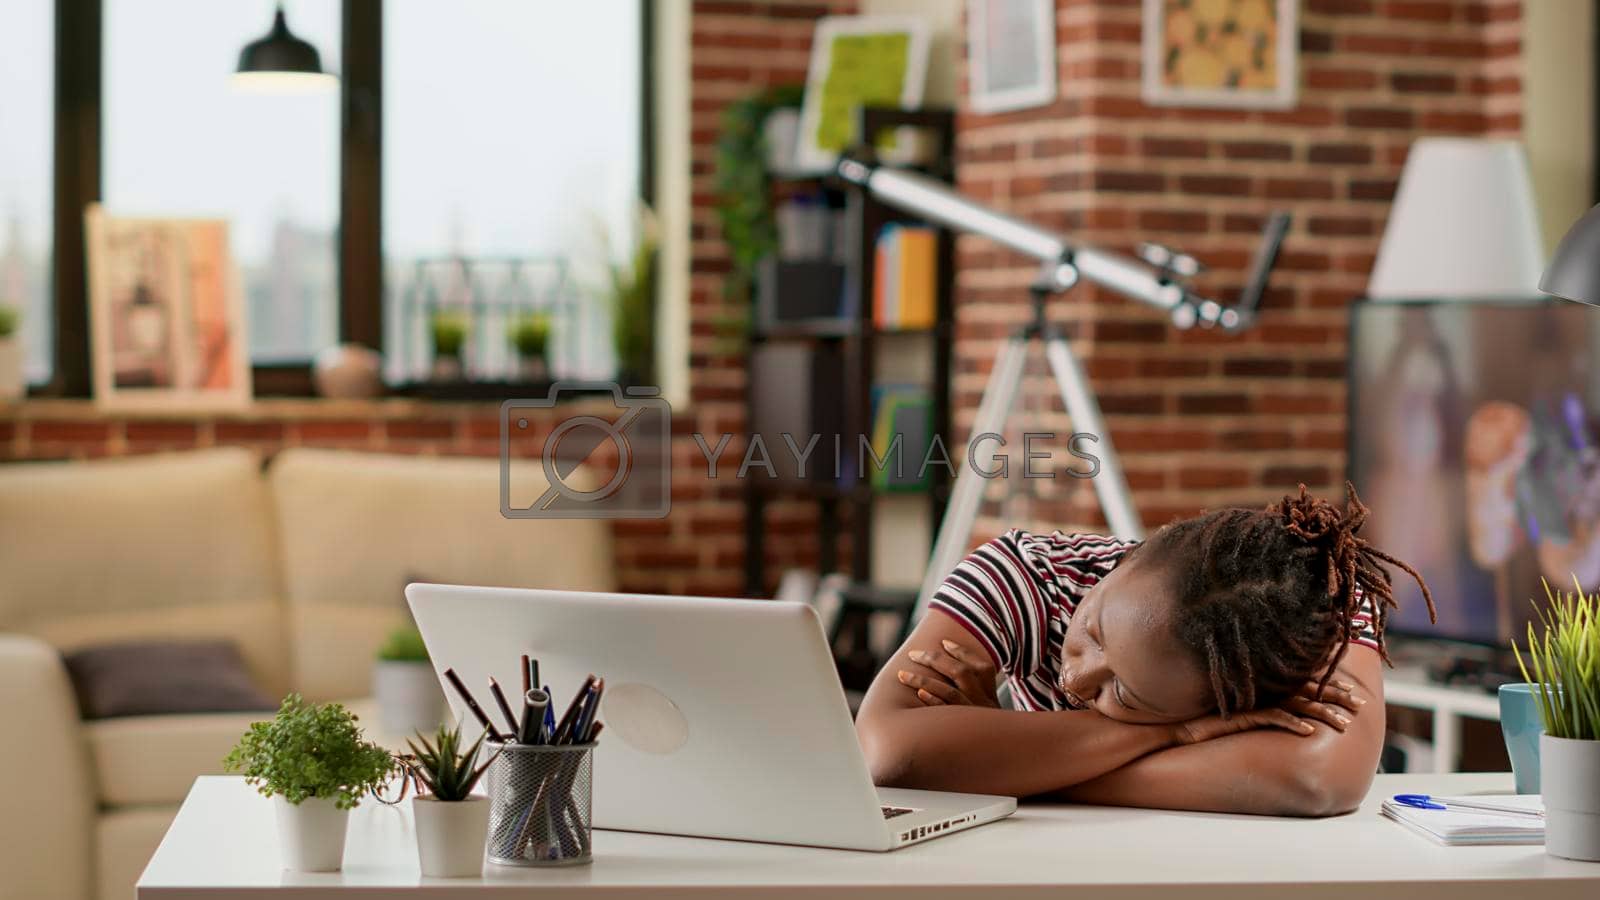 Royalty free image of Tired stressed employee falling asleep on desk at remote work by DCStudio